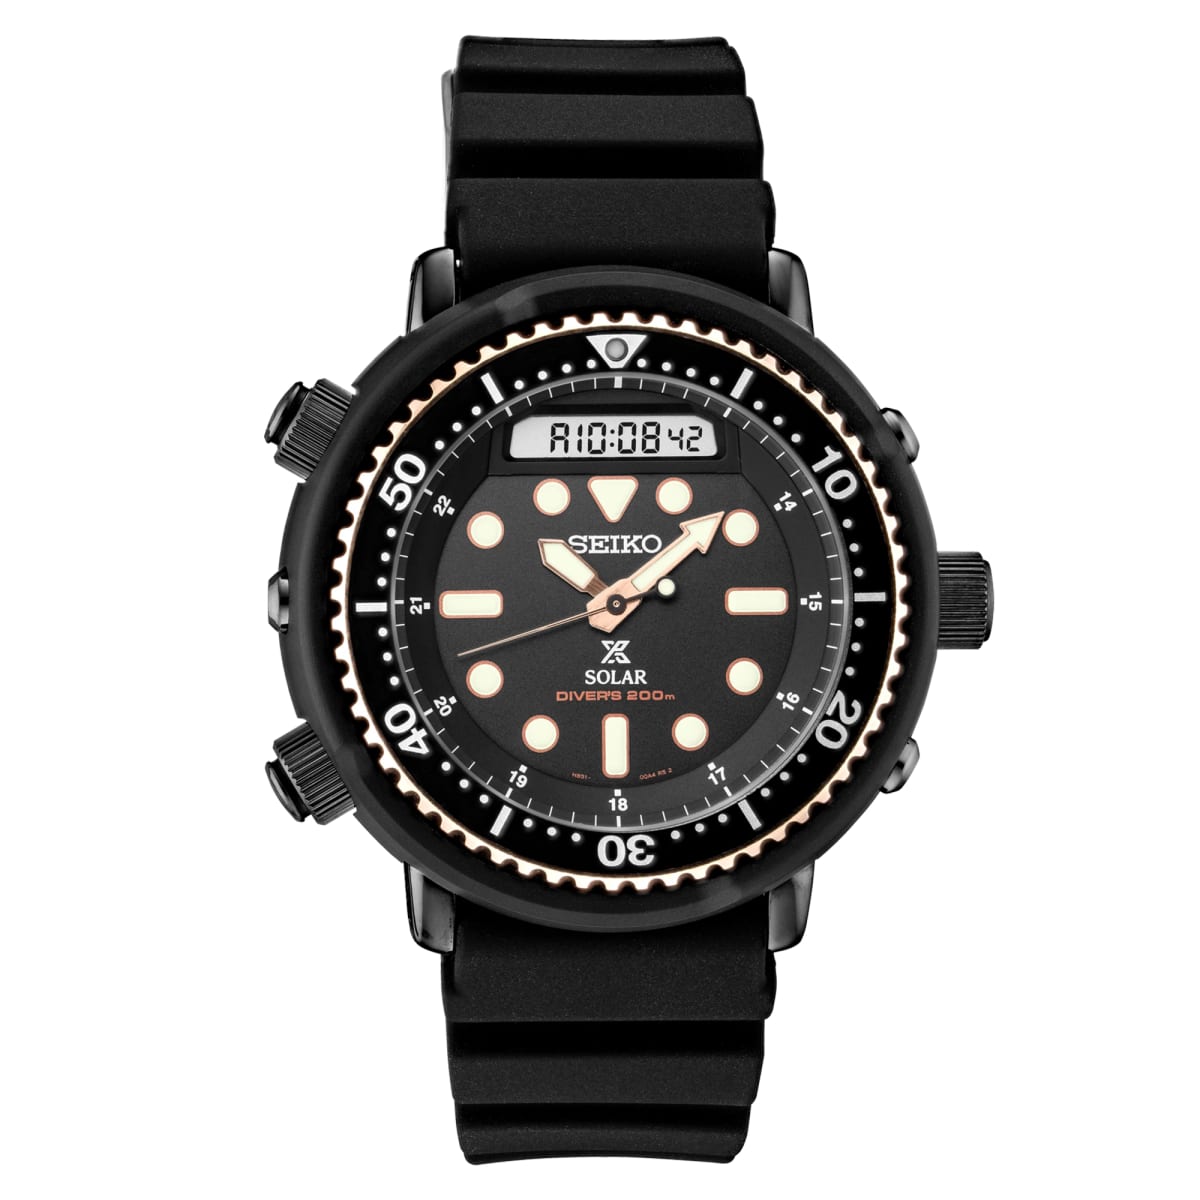 Seiko issues a modern version of their 1982 Hybrid Diver's Watch - Acquire